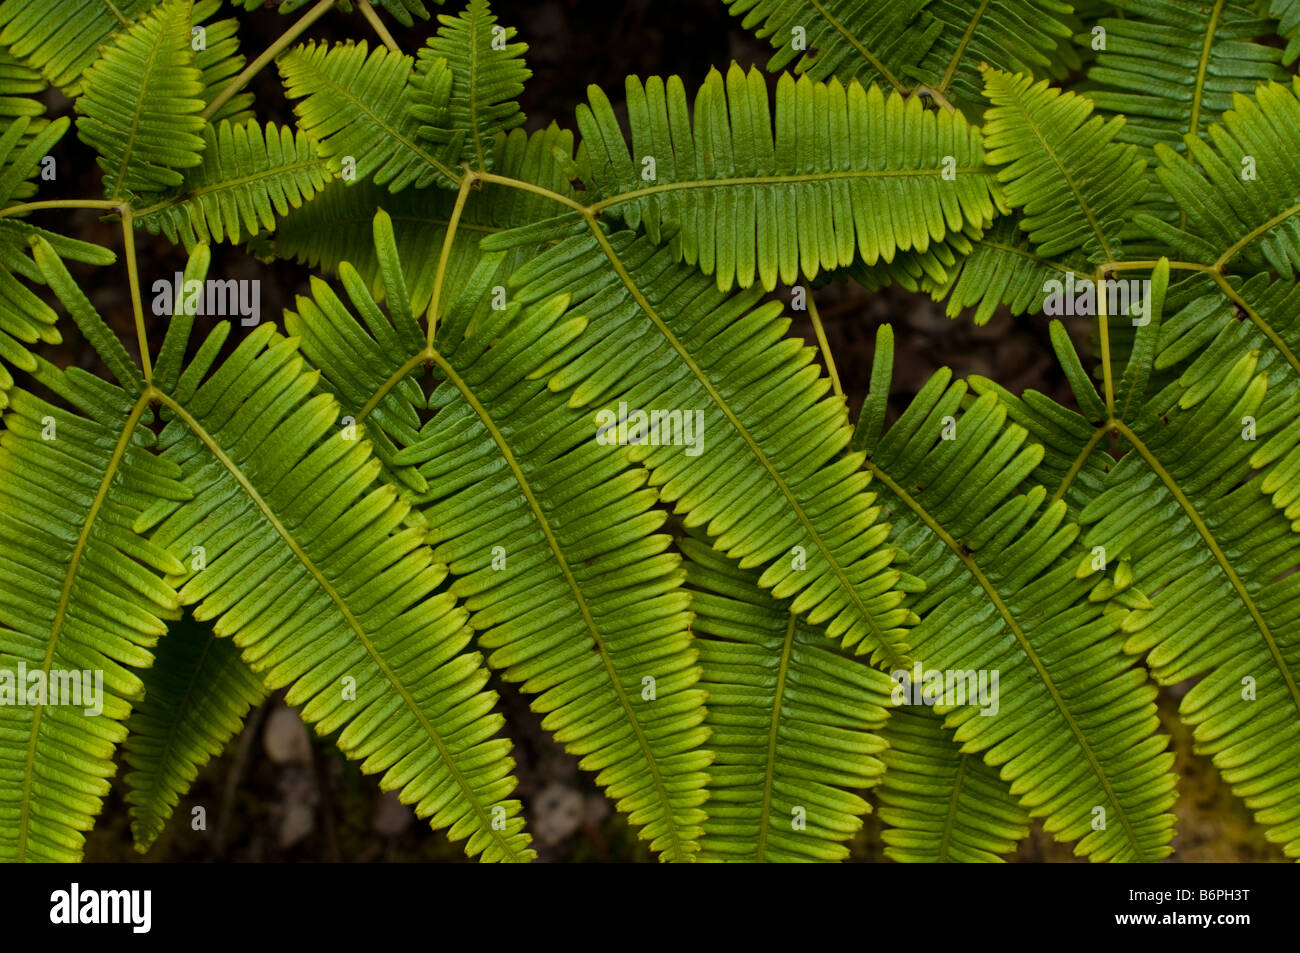 Group of fern leaves in Volcano National Park, Big Island Hawaii. Stock Photo